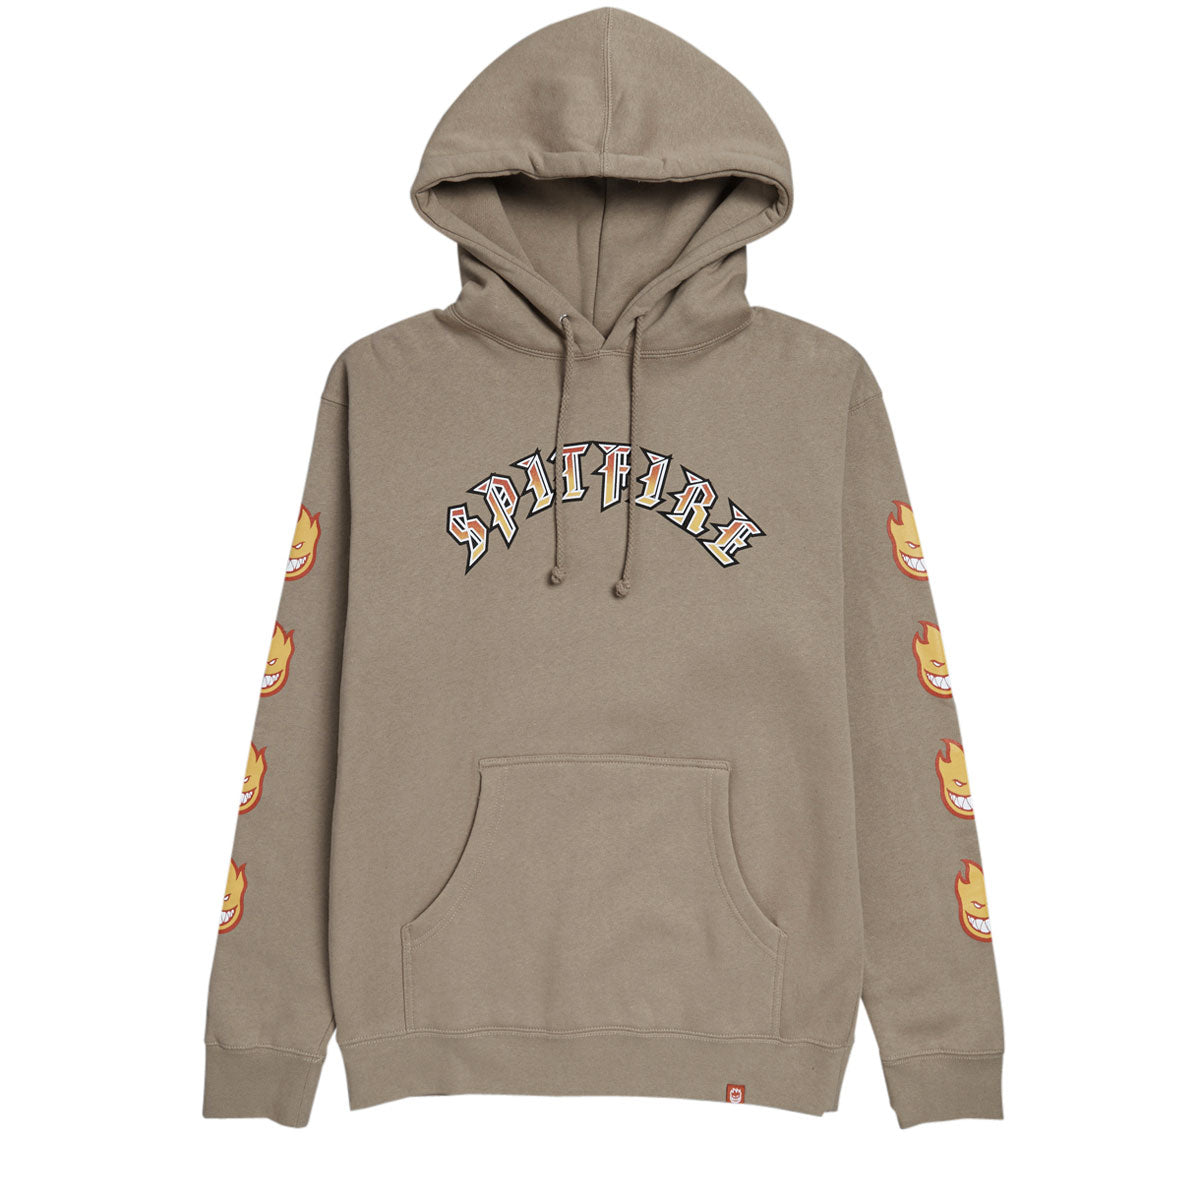 Spitfire Old E Bighead Fill Sleeve Hoodie - Sandstone/Gold/Red